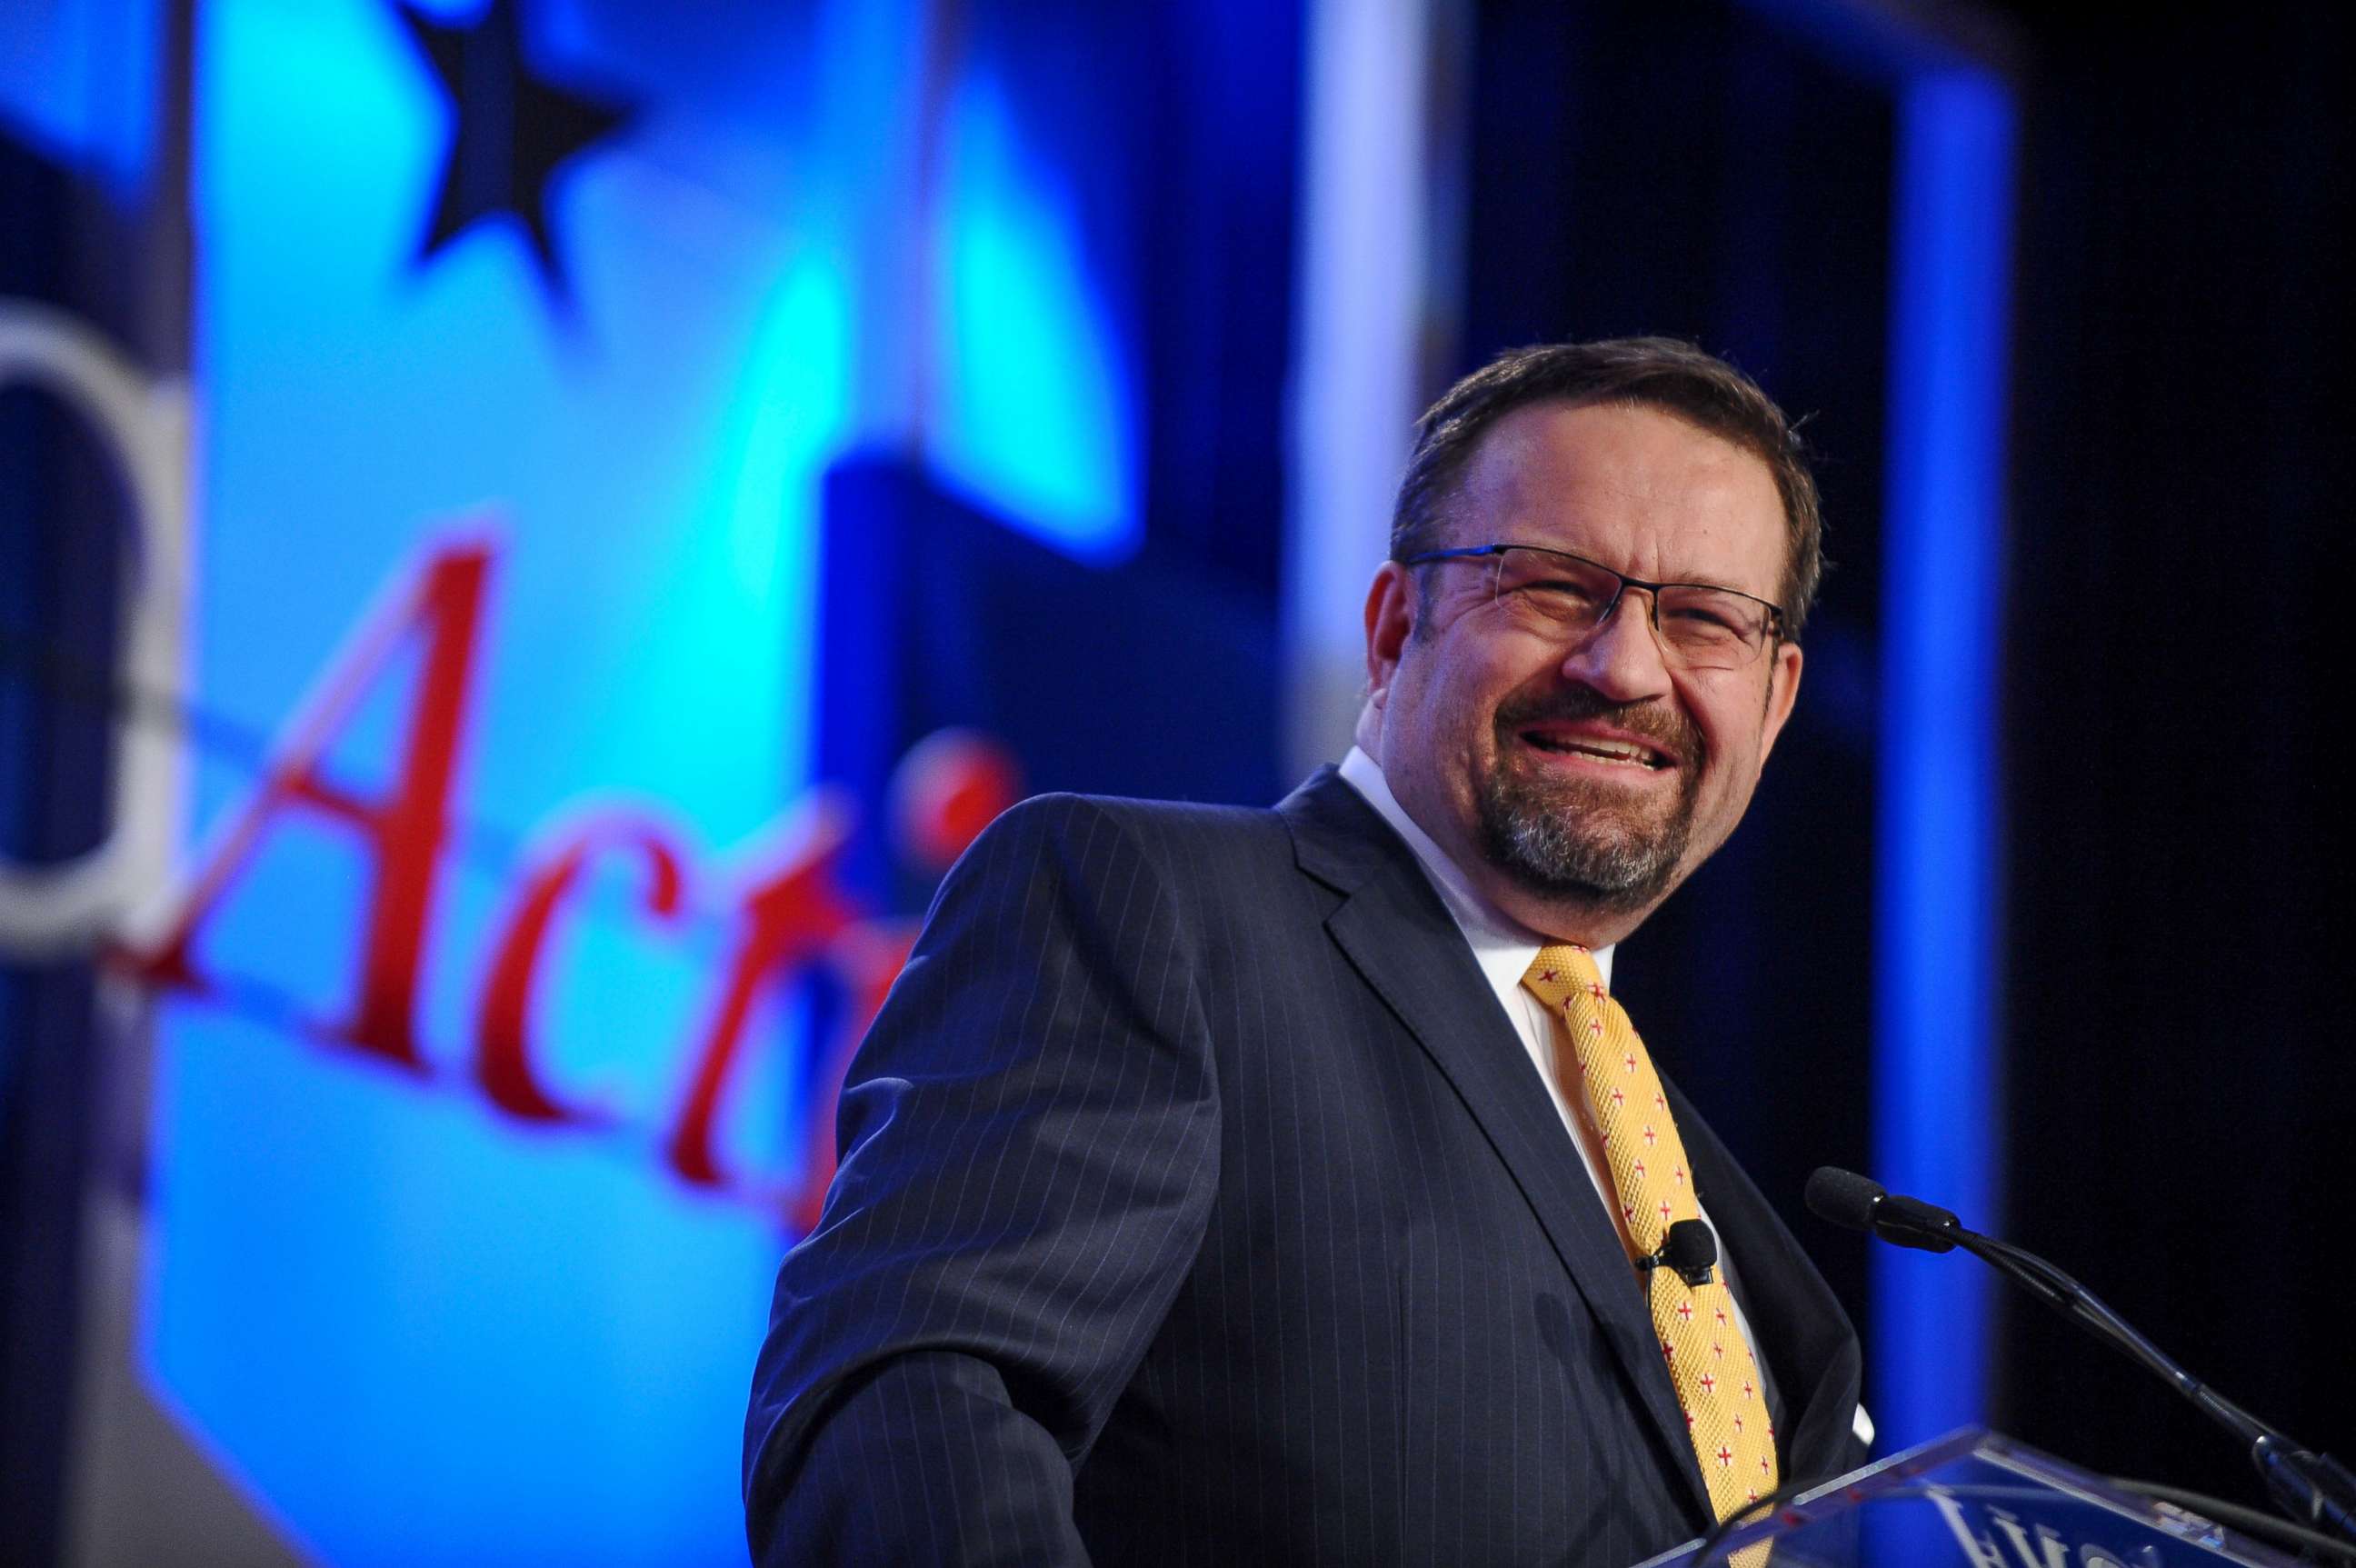 PHOTO: Sebastian Gorka delivers remarks during the Value Voters Summit at the Omni Shoreham Hotel in Washington, D.C., Oct. 14, 2017. 